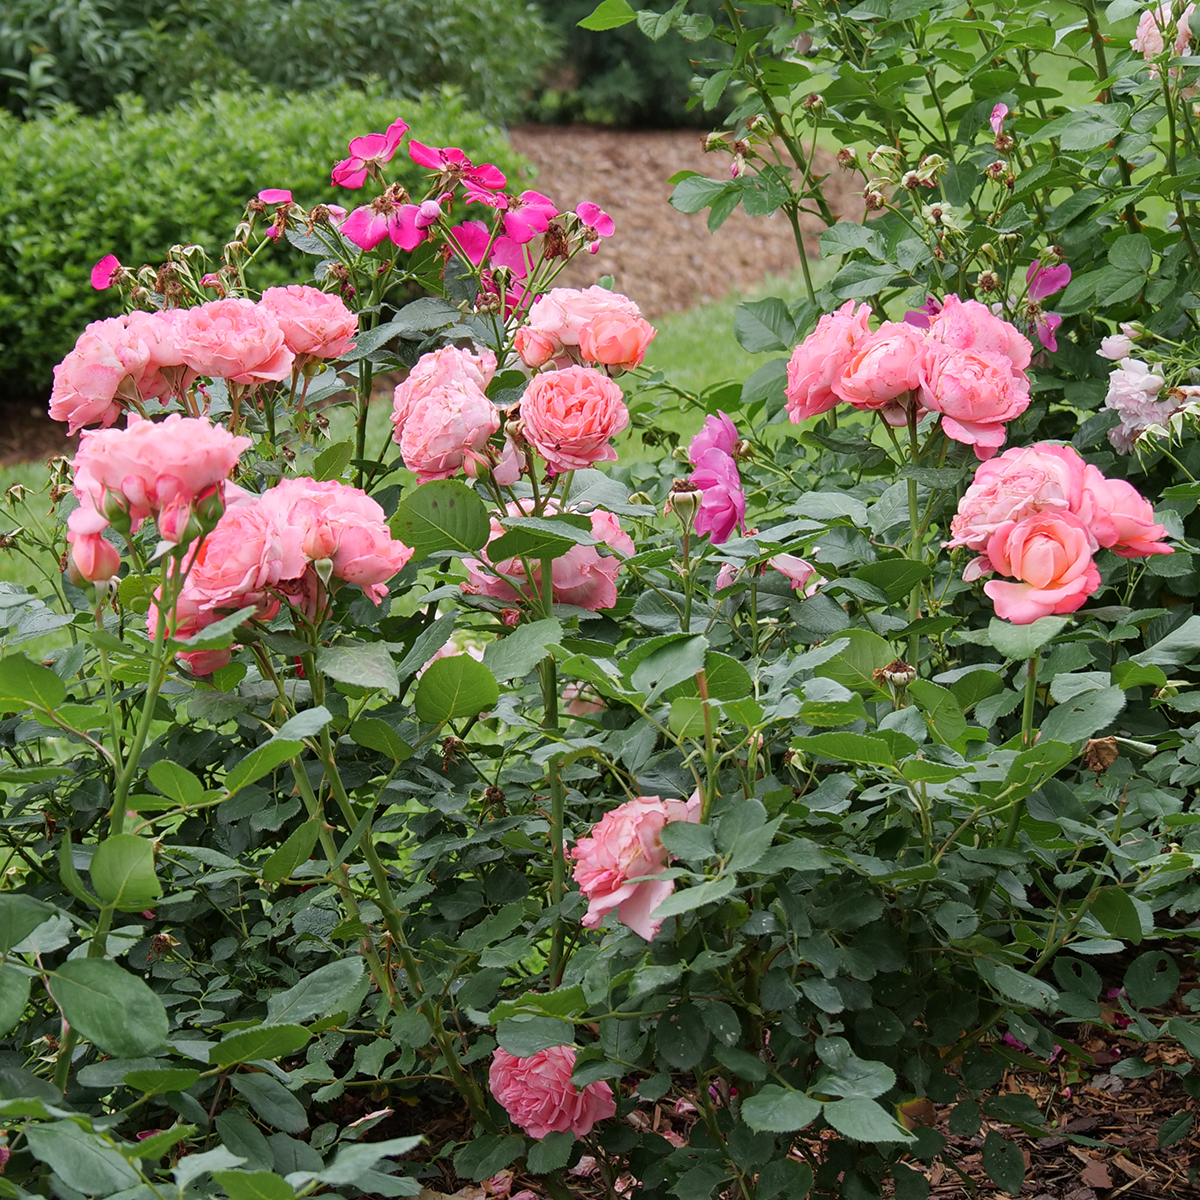 Reminiscent Coral rose growing and blooming in a garden.